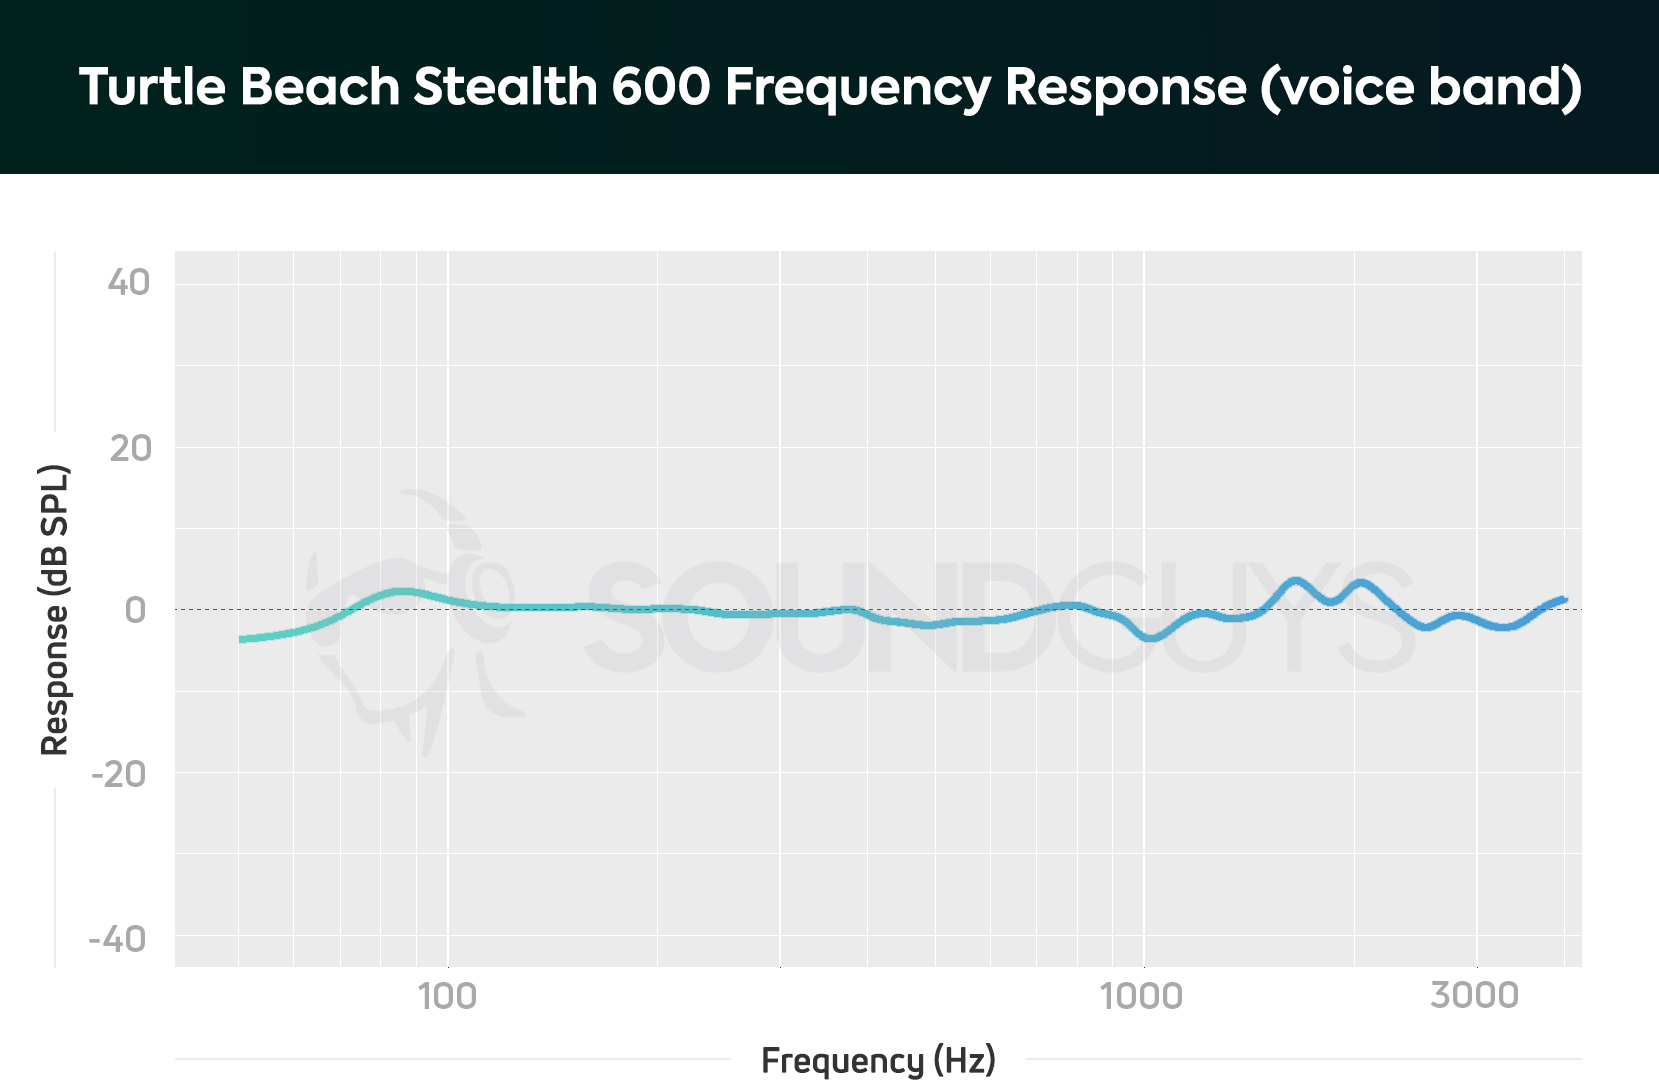 The Turtle Beach Stealth 600 Gen 2 microphone frequency response chart depicts very accurate sound quality.